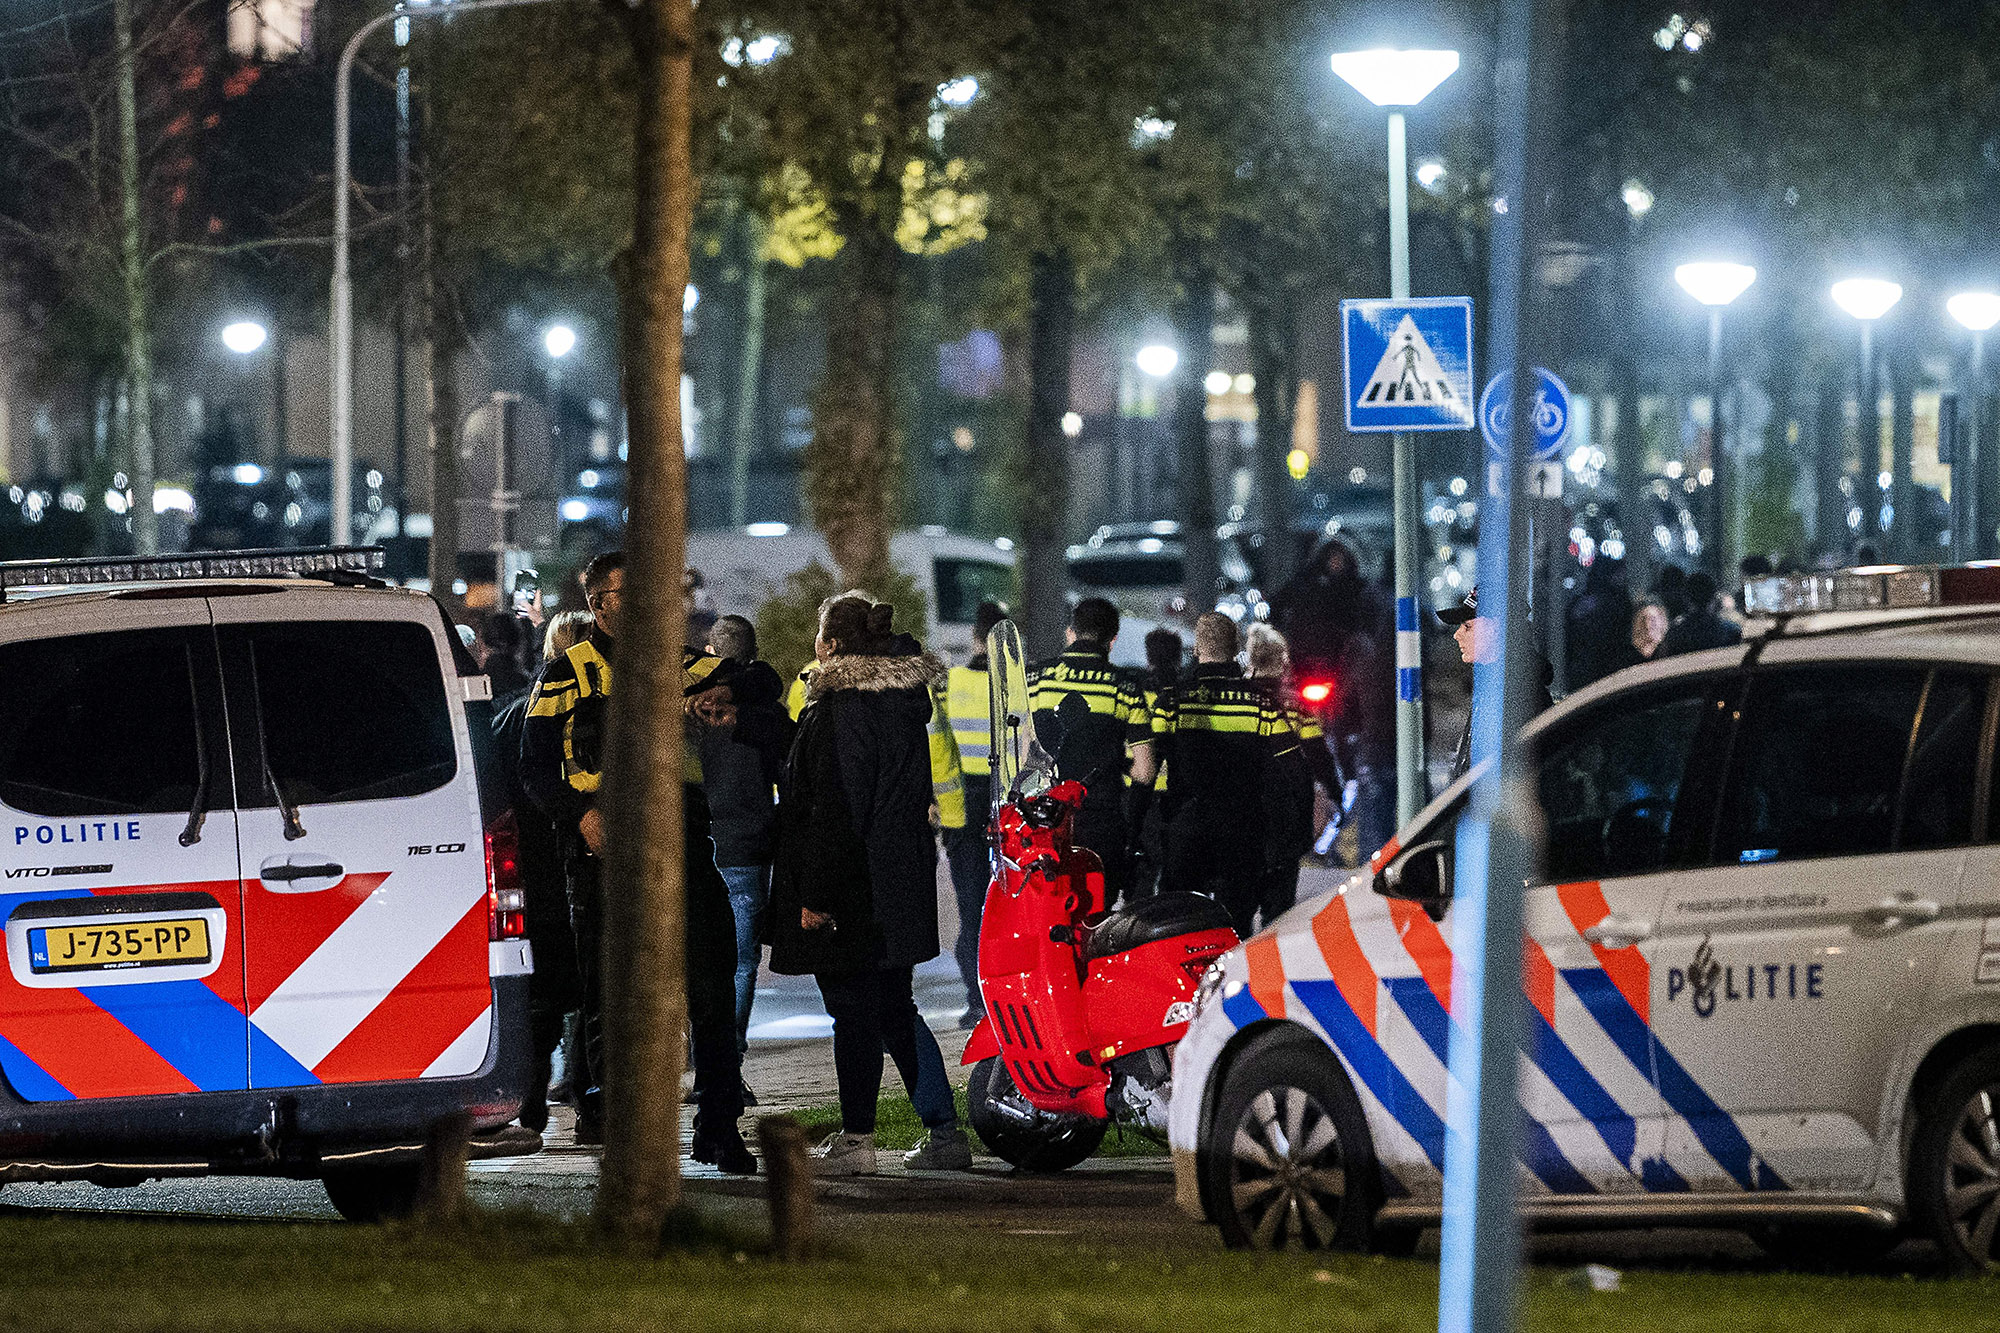 Dutch Police Arrest More Than 30 Amid Ongoing Unrest - Bloomberg